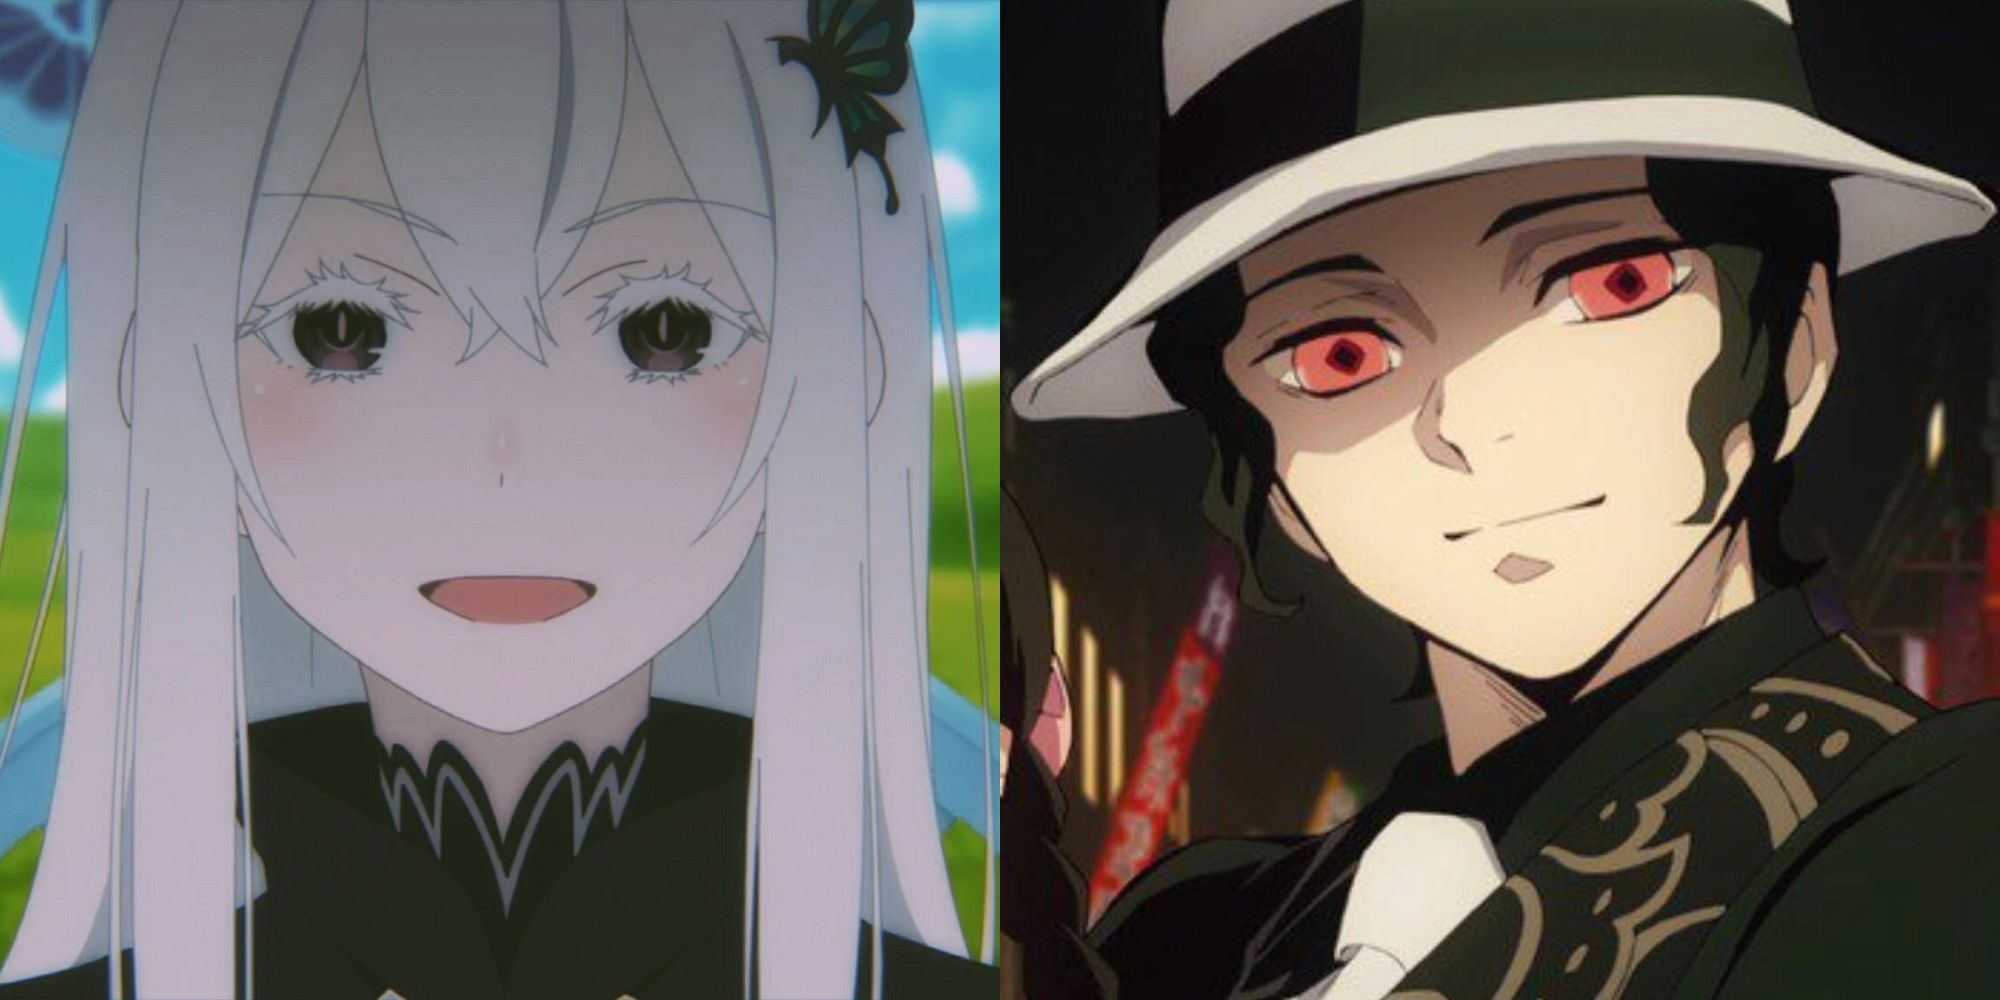 You'll Never Be Able To Name 100% Of These Anime Villains